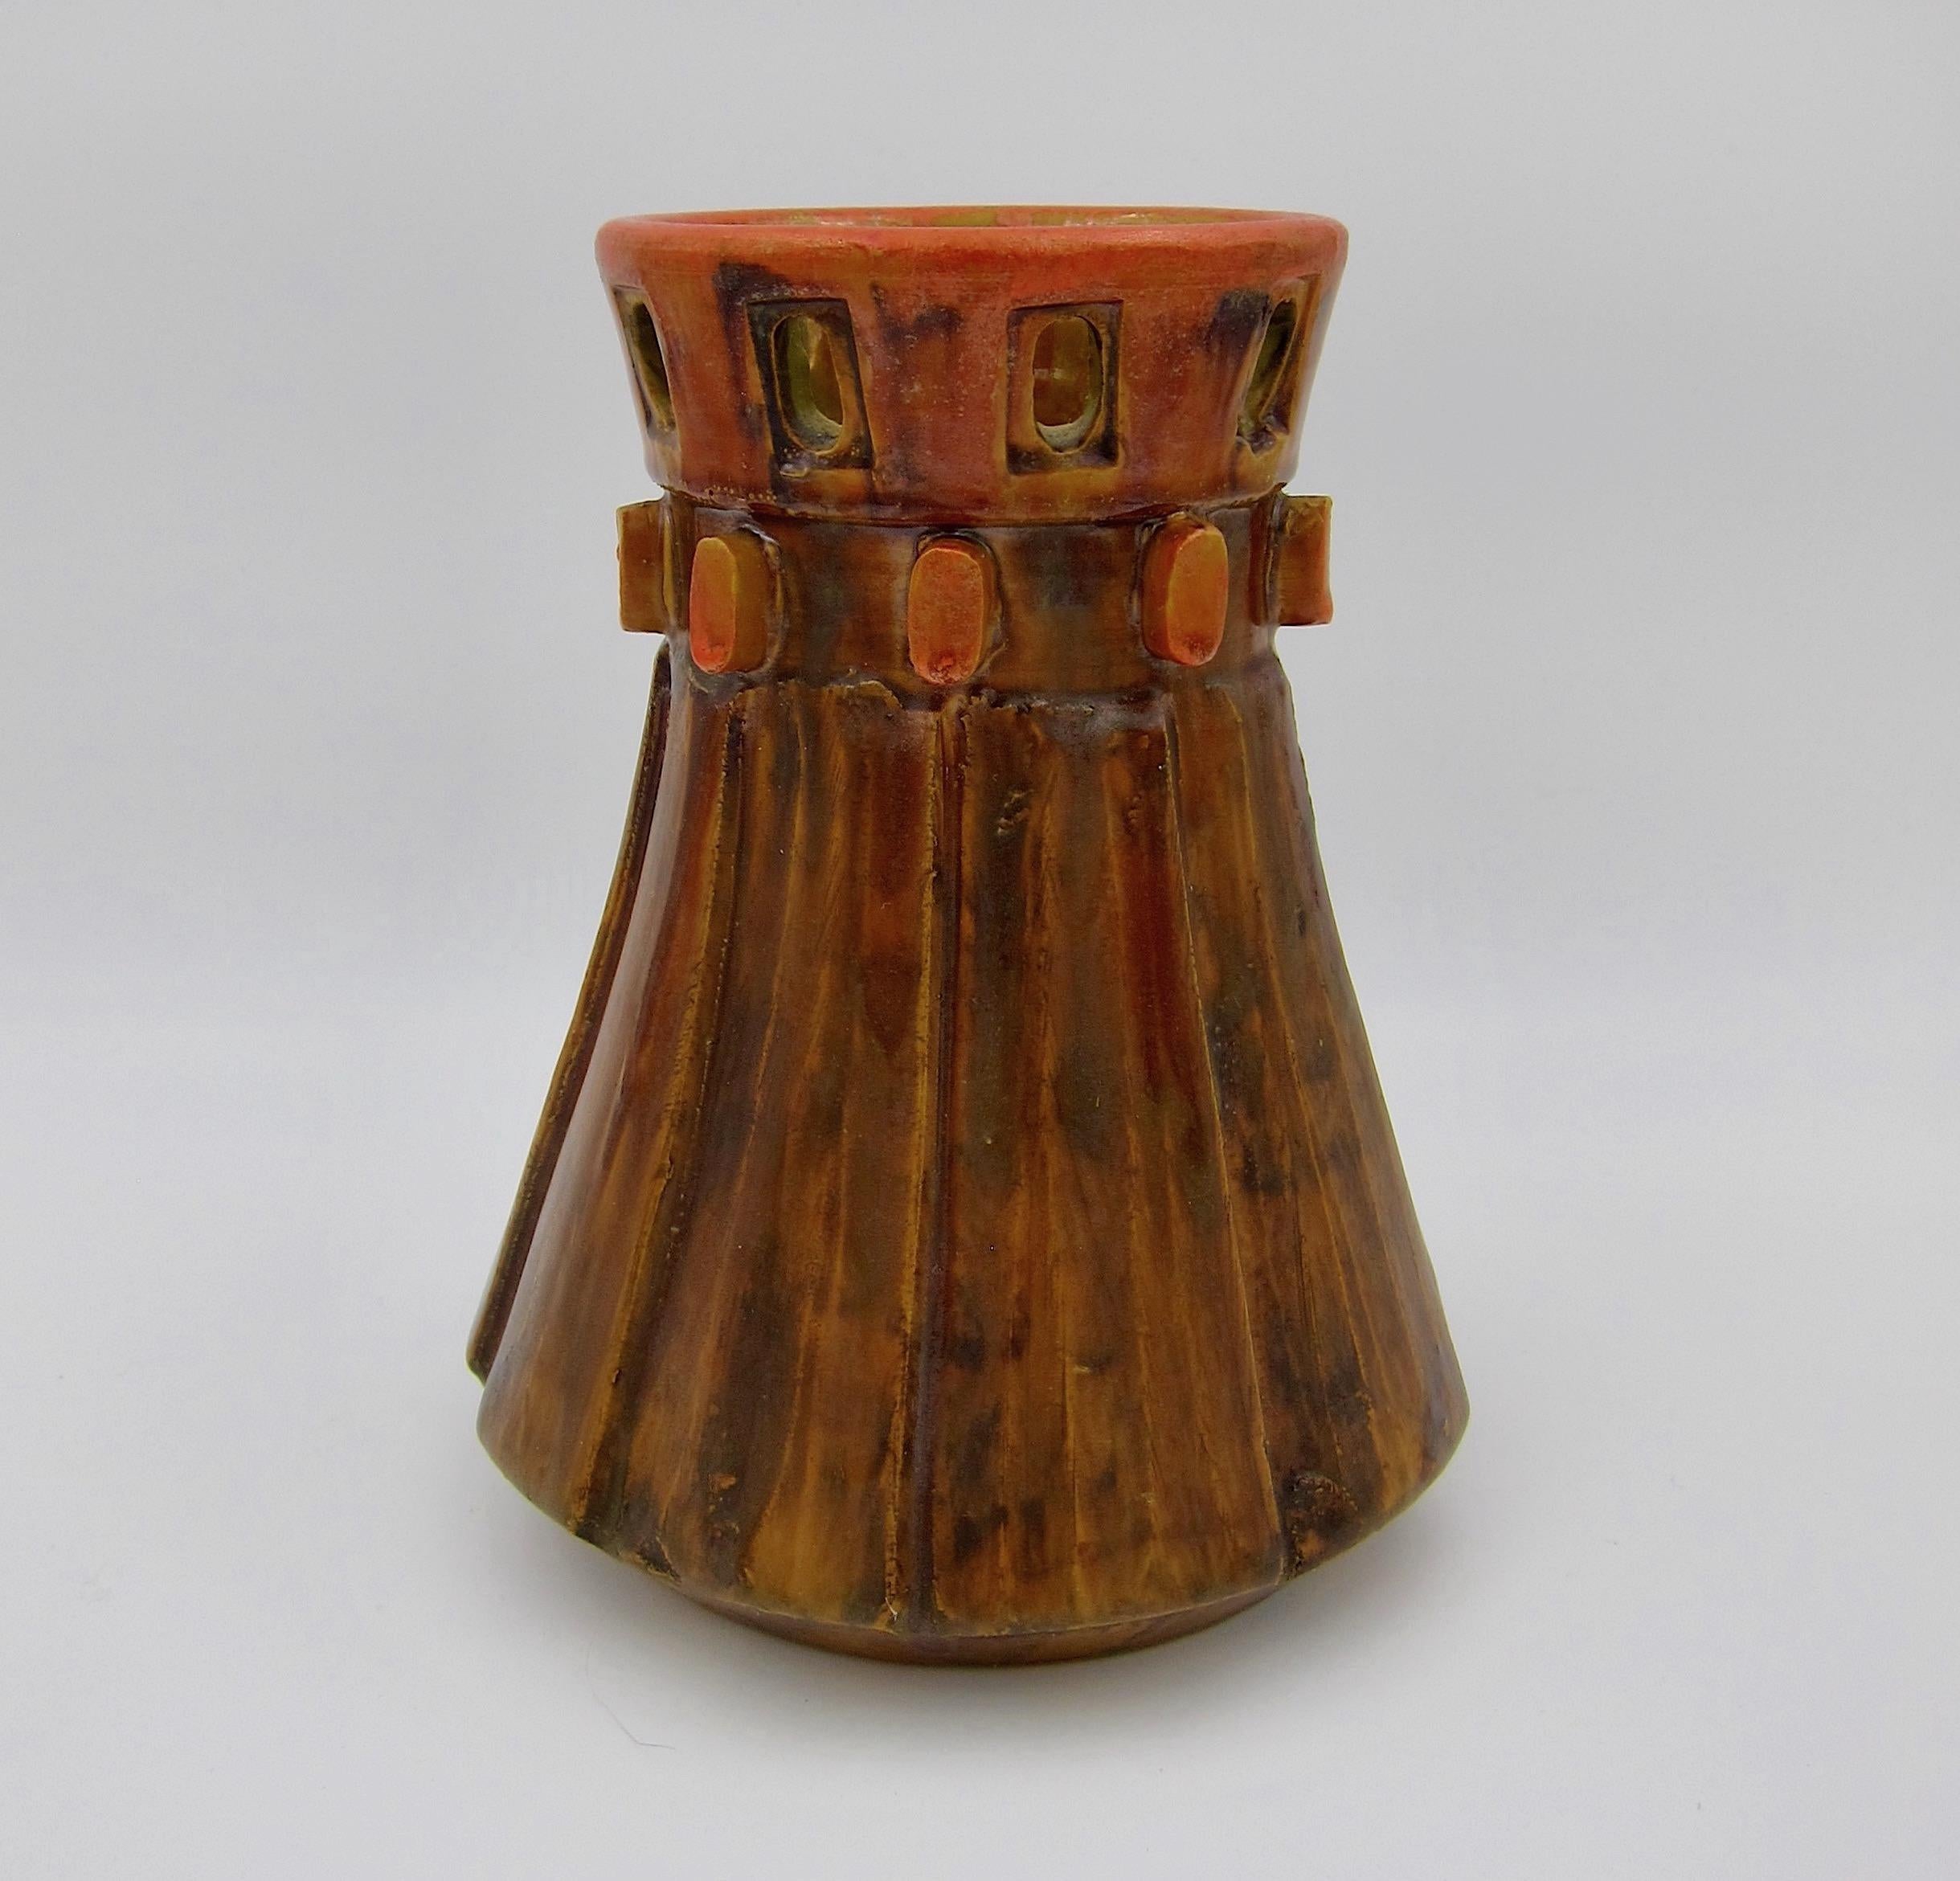 A midcentury Raymor vase designed by Alvino Bagni for Bagni Ceramiche of Italy, dating circa 1960s. The sculptural Italian Modern art pottery vessel is wheel thrown and features a pierced upper rim over a collar of applied cog-like projections and a